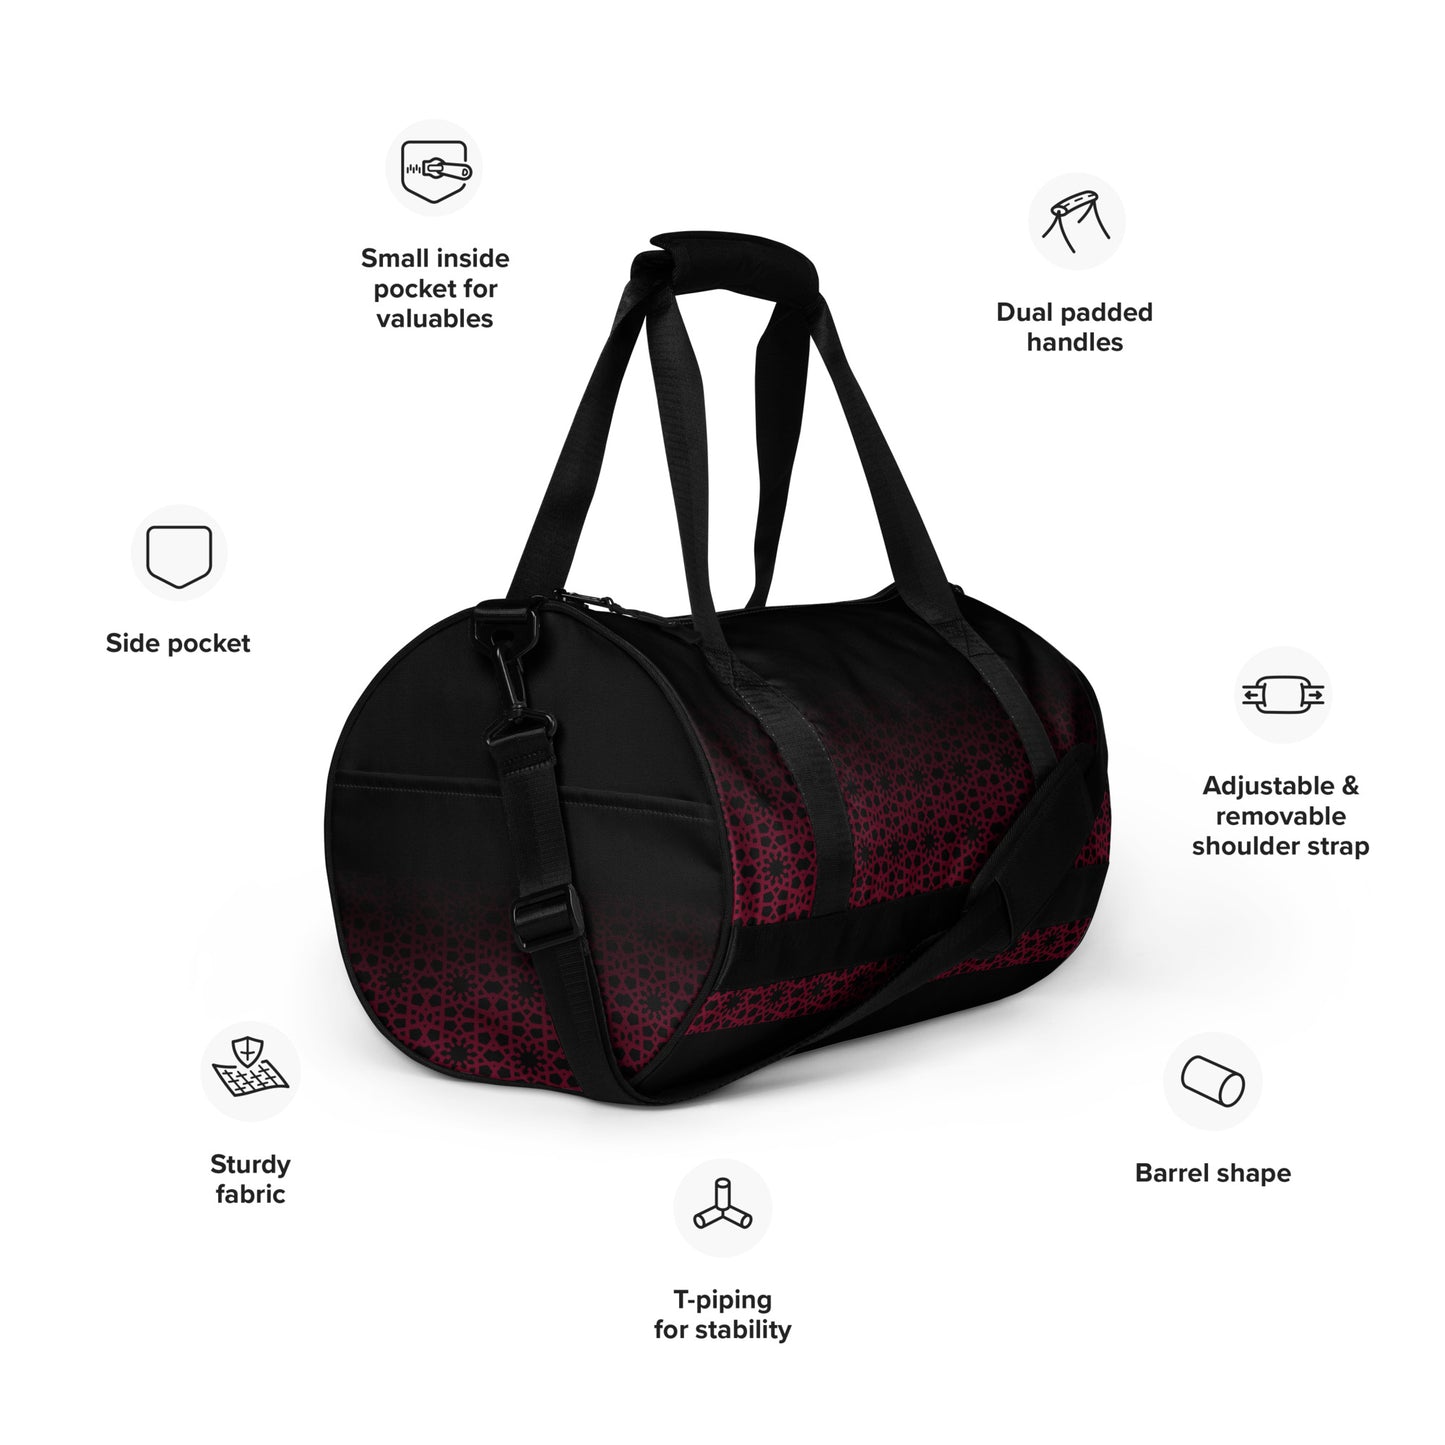 All-over print gym bag - Geometric Ombre in Black and Red